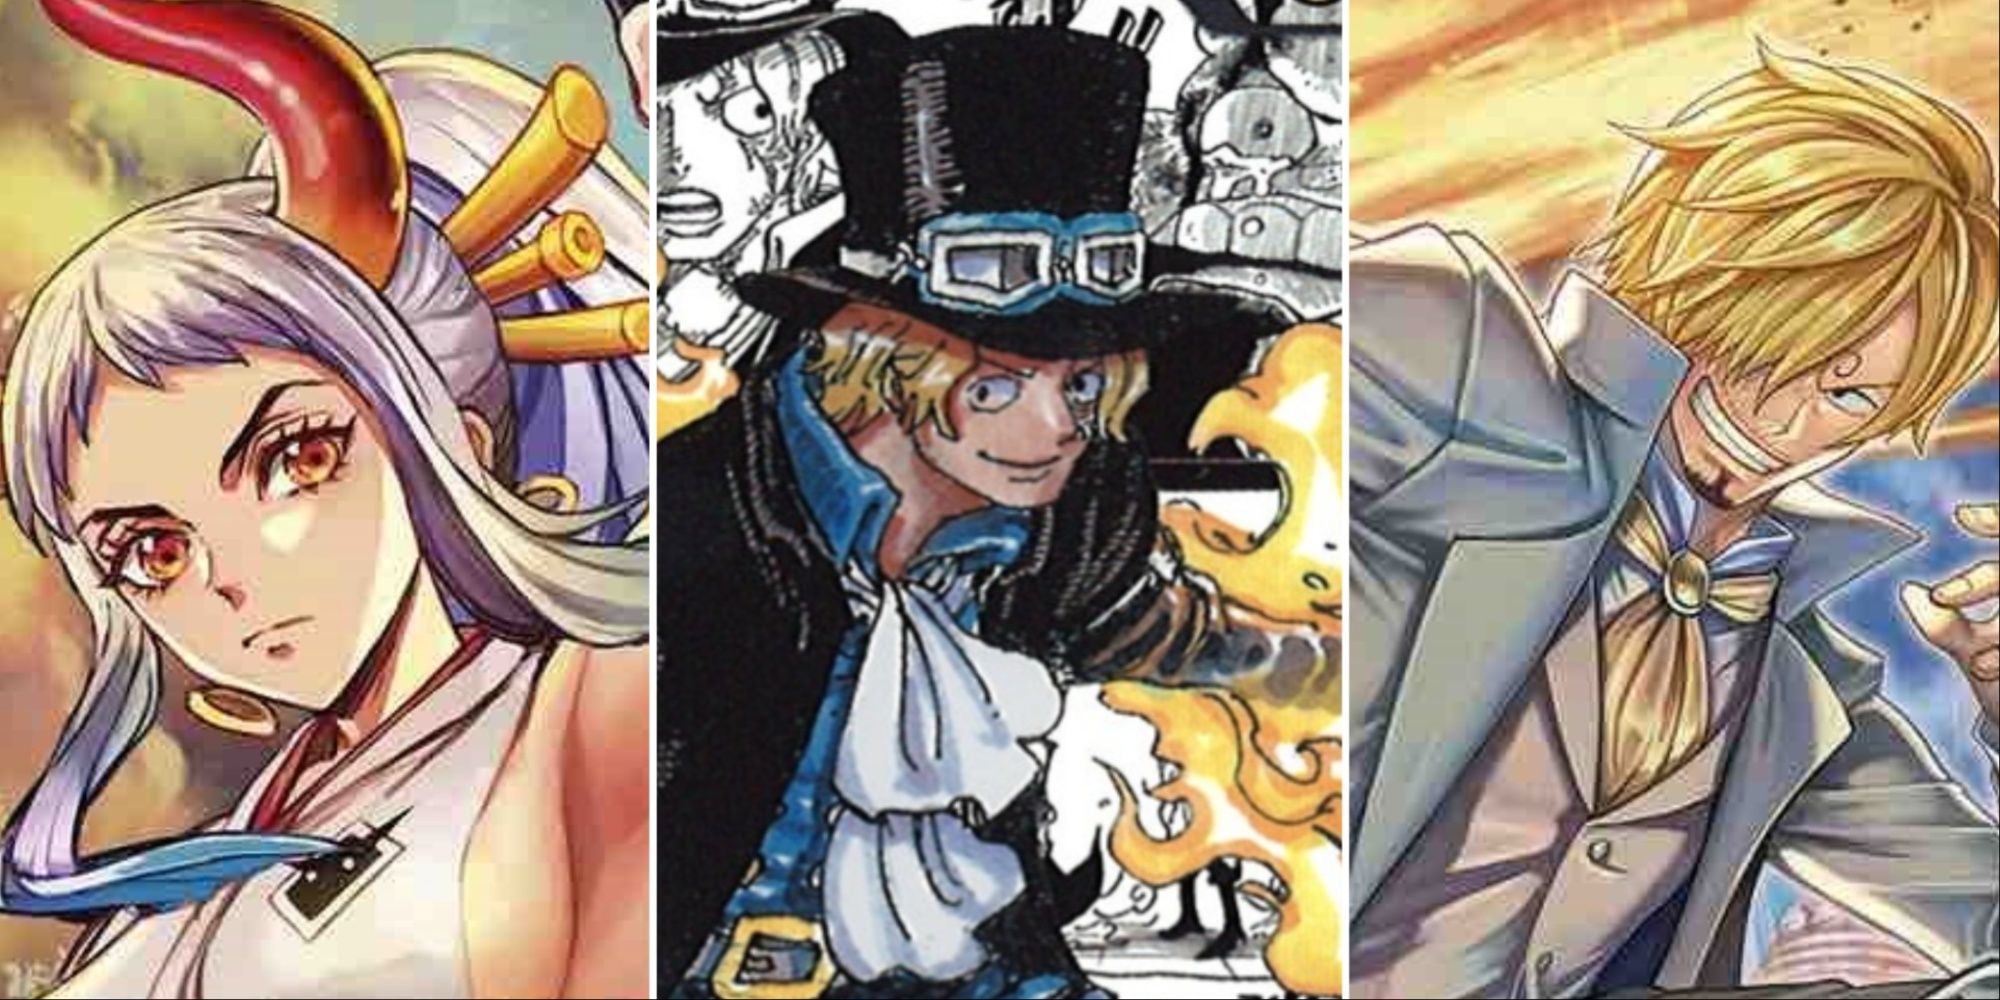 yamato sabo and sanji alt art banner from one piece card game op04